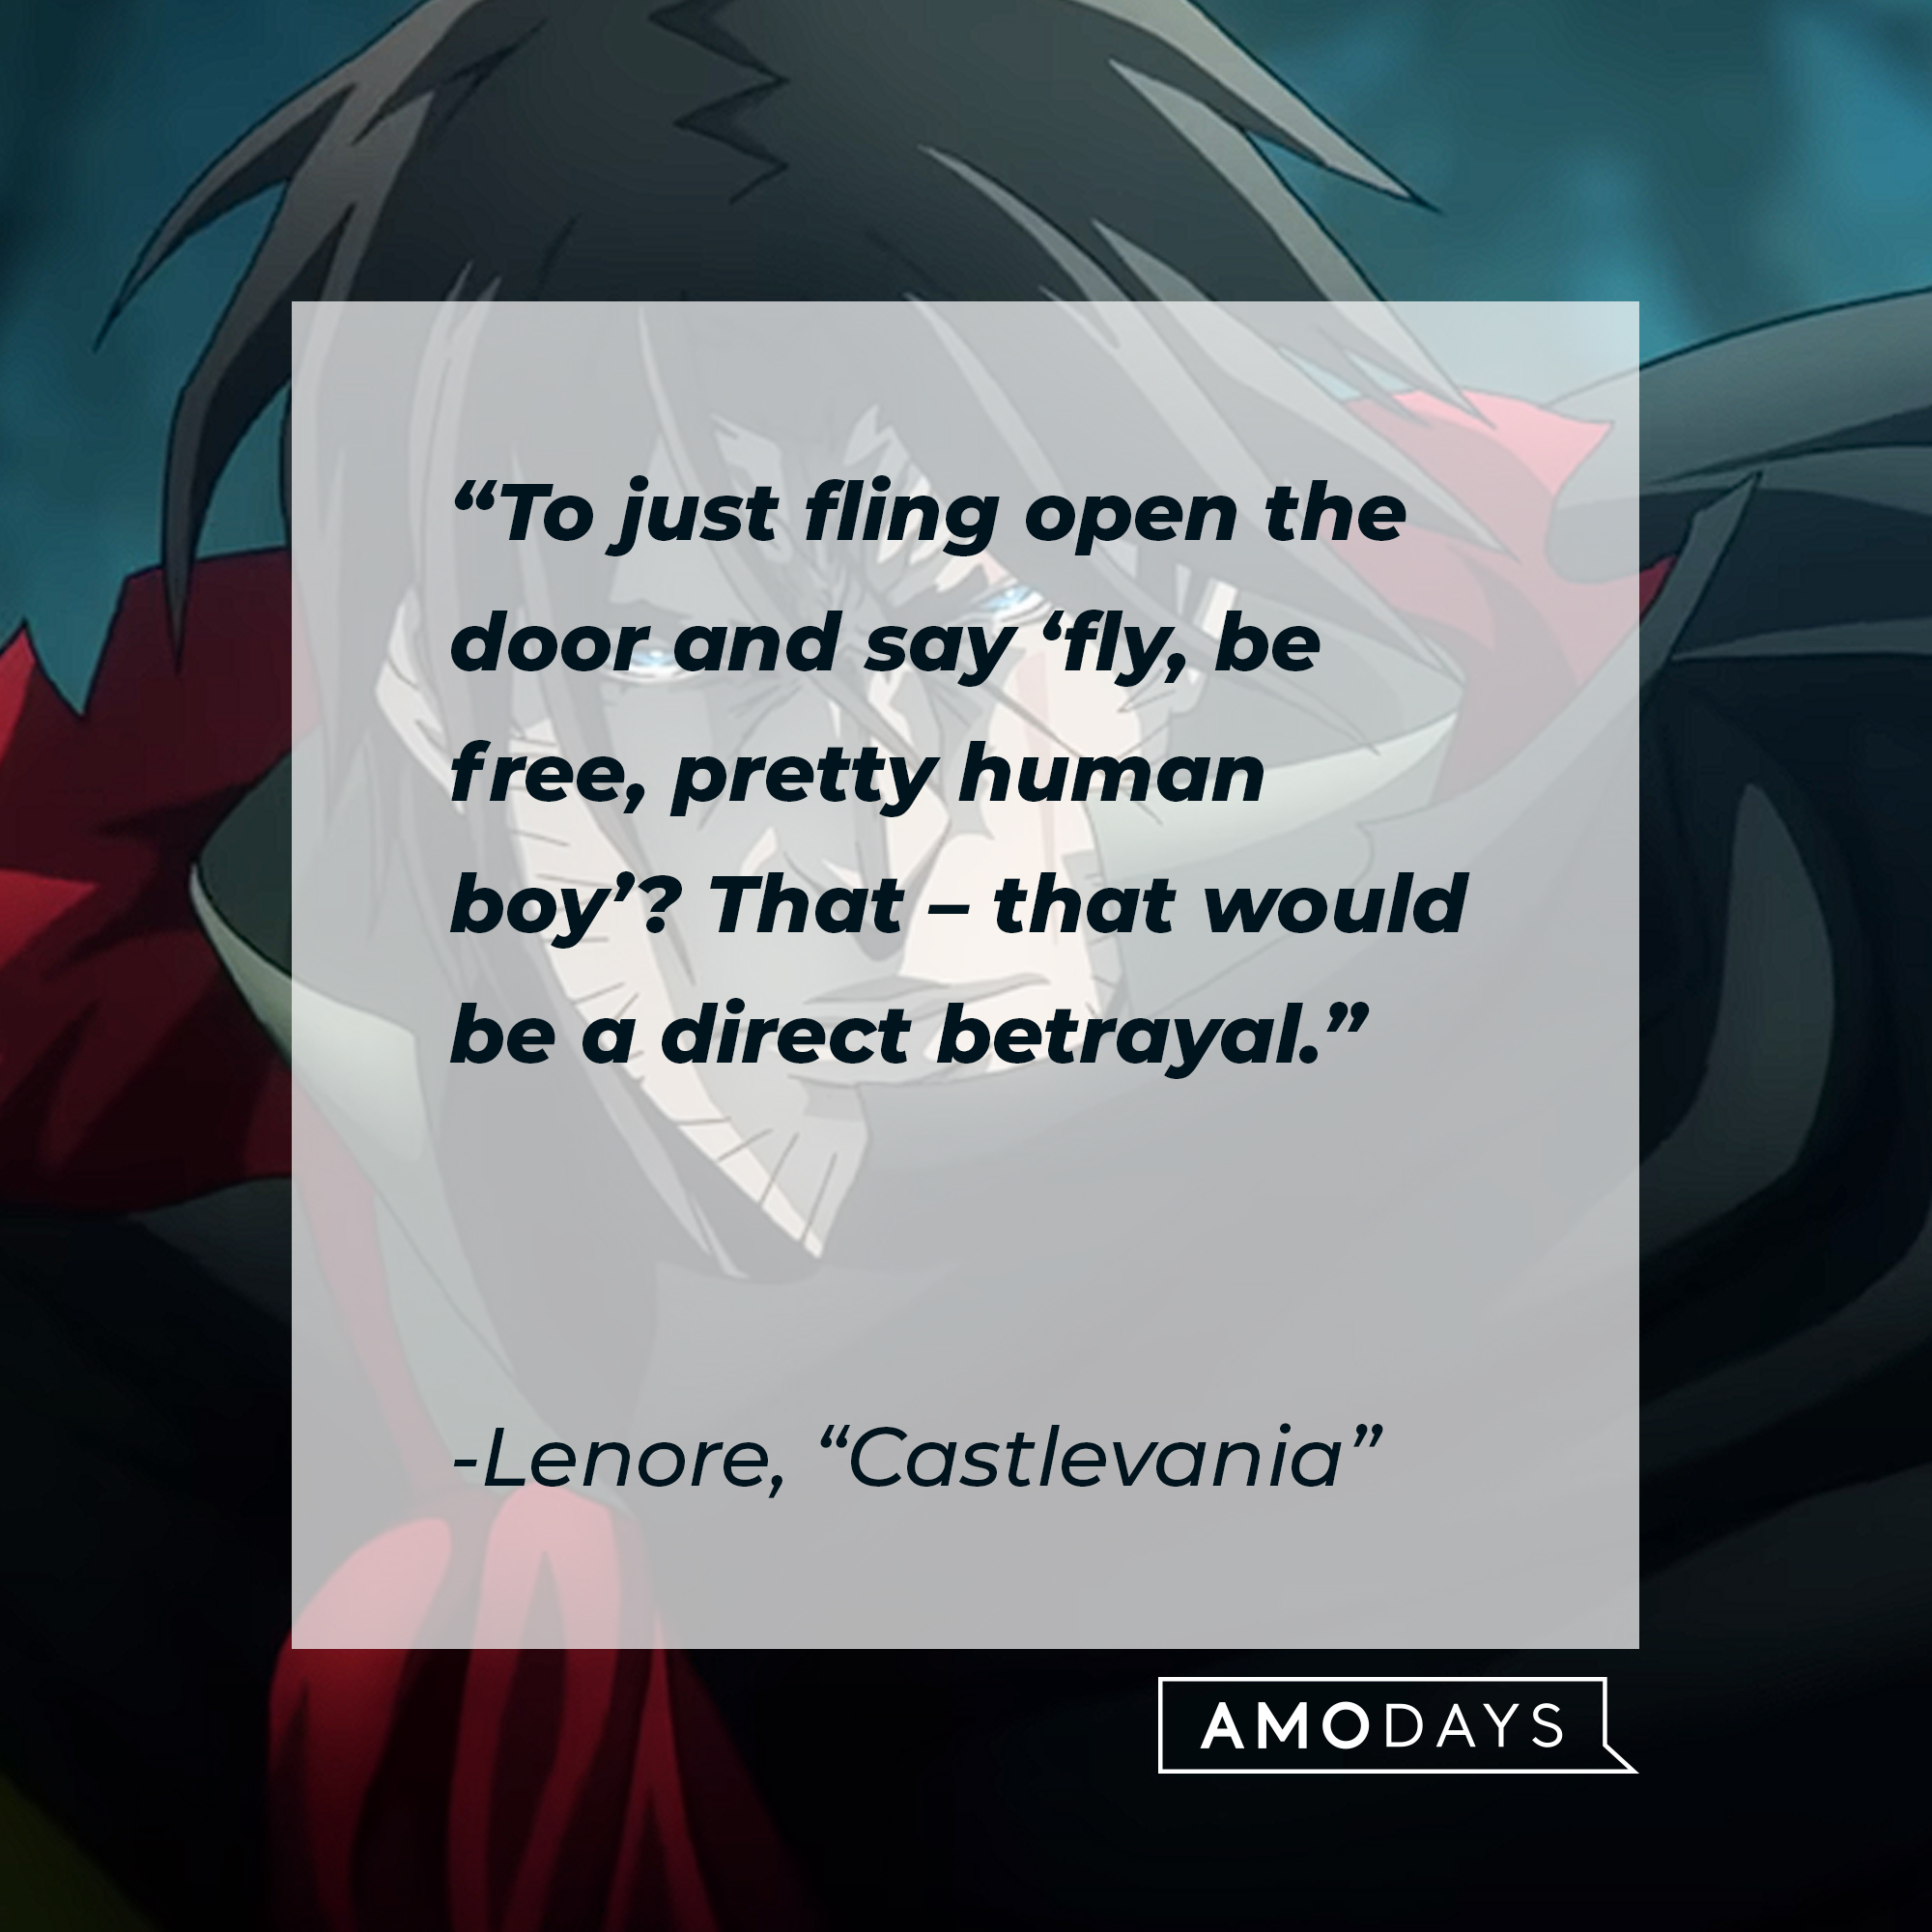 Lenore's quote from "Castlevania:" “To just fling open the door and say ‘fly, be free, pretty human boy’? That – that would be a direct betrayal.” | Source: Youtube.com/Netflix